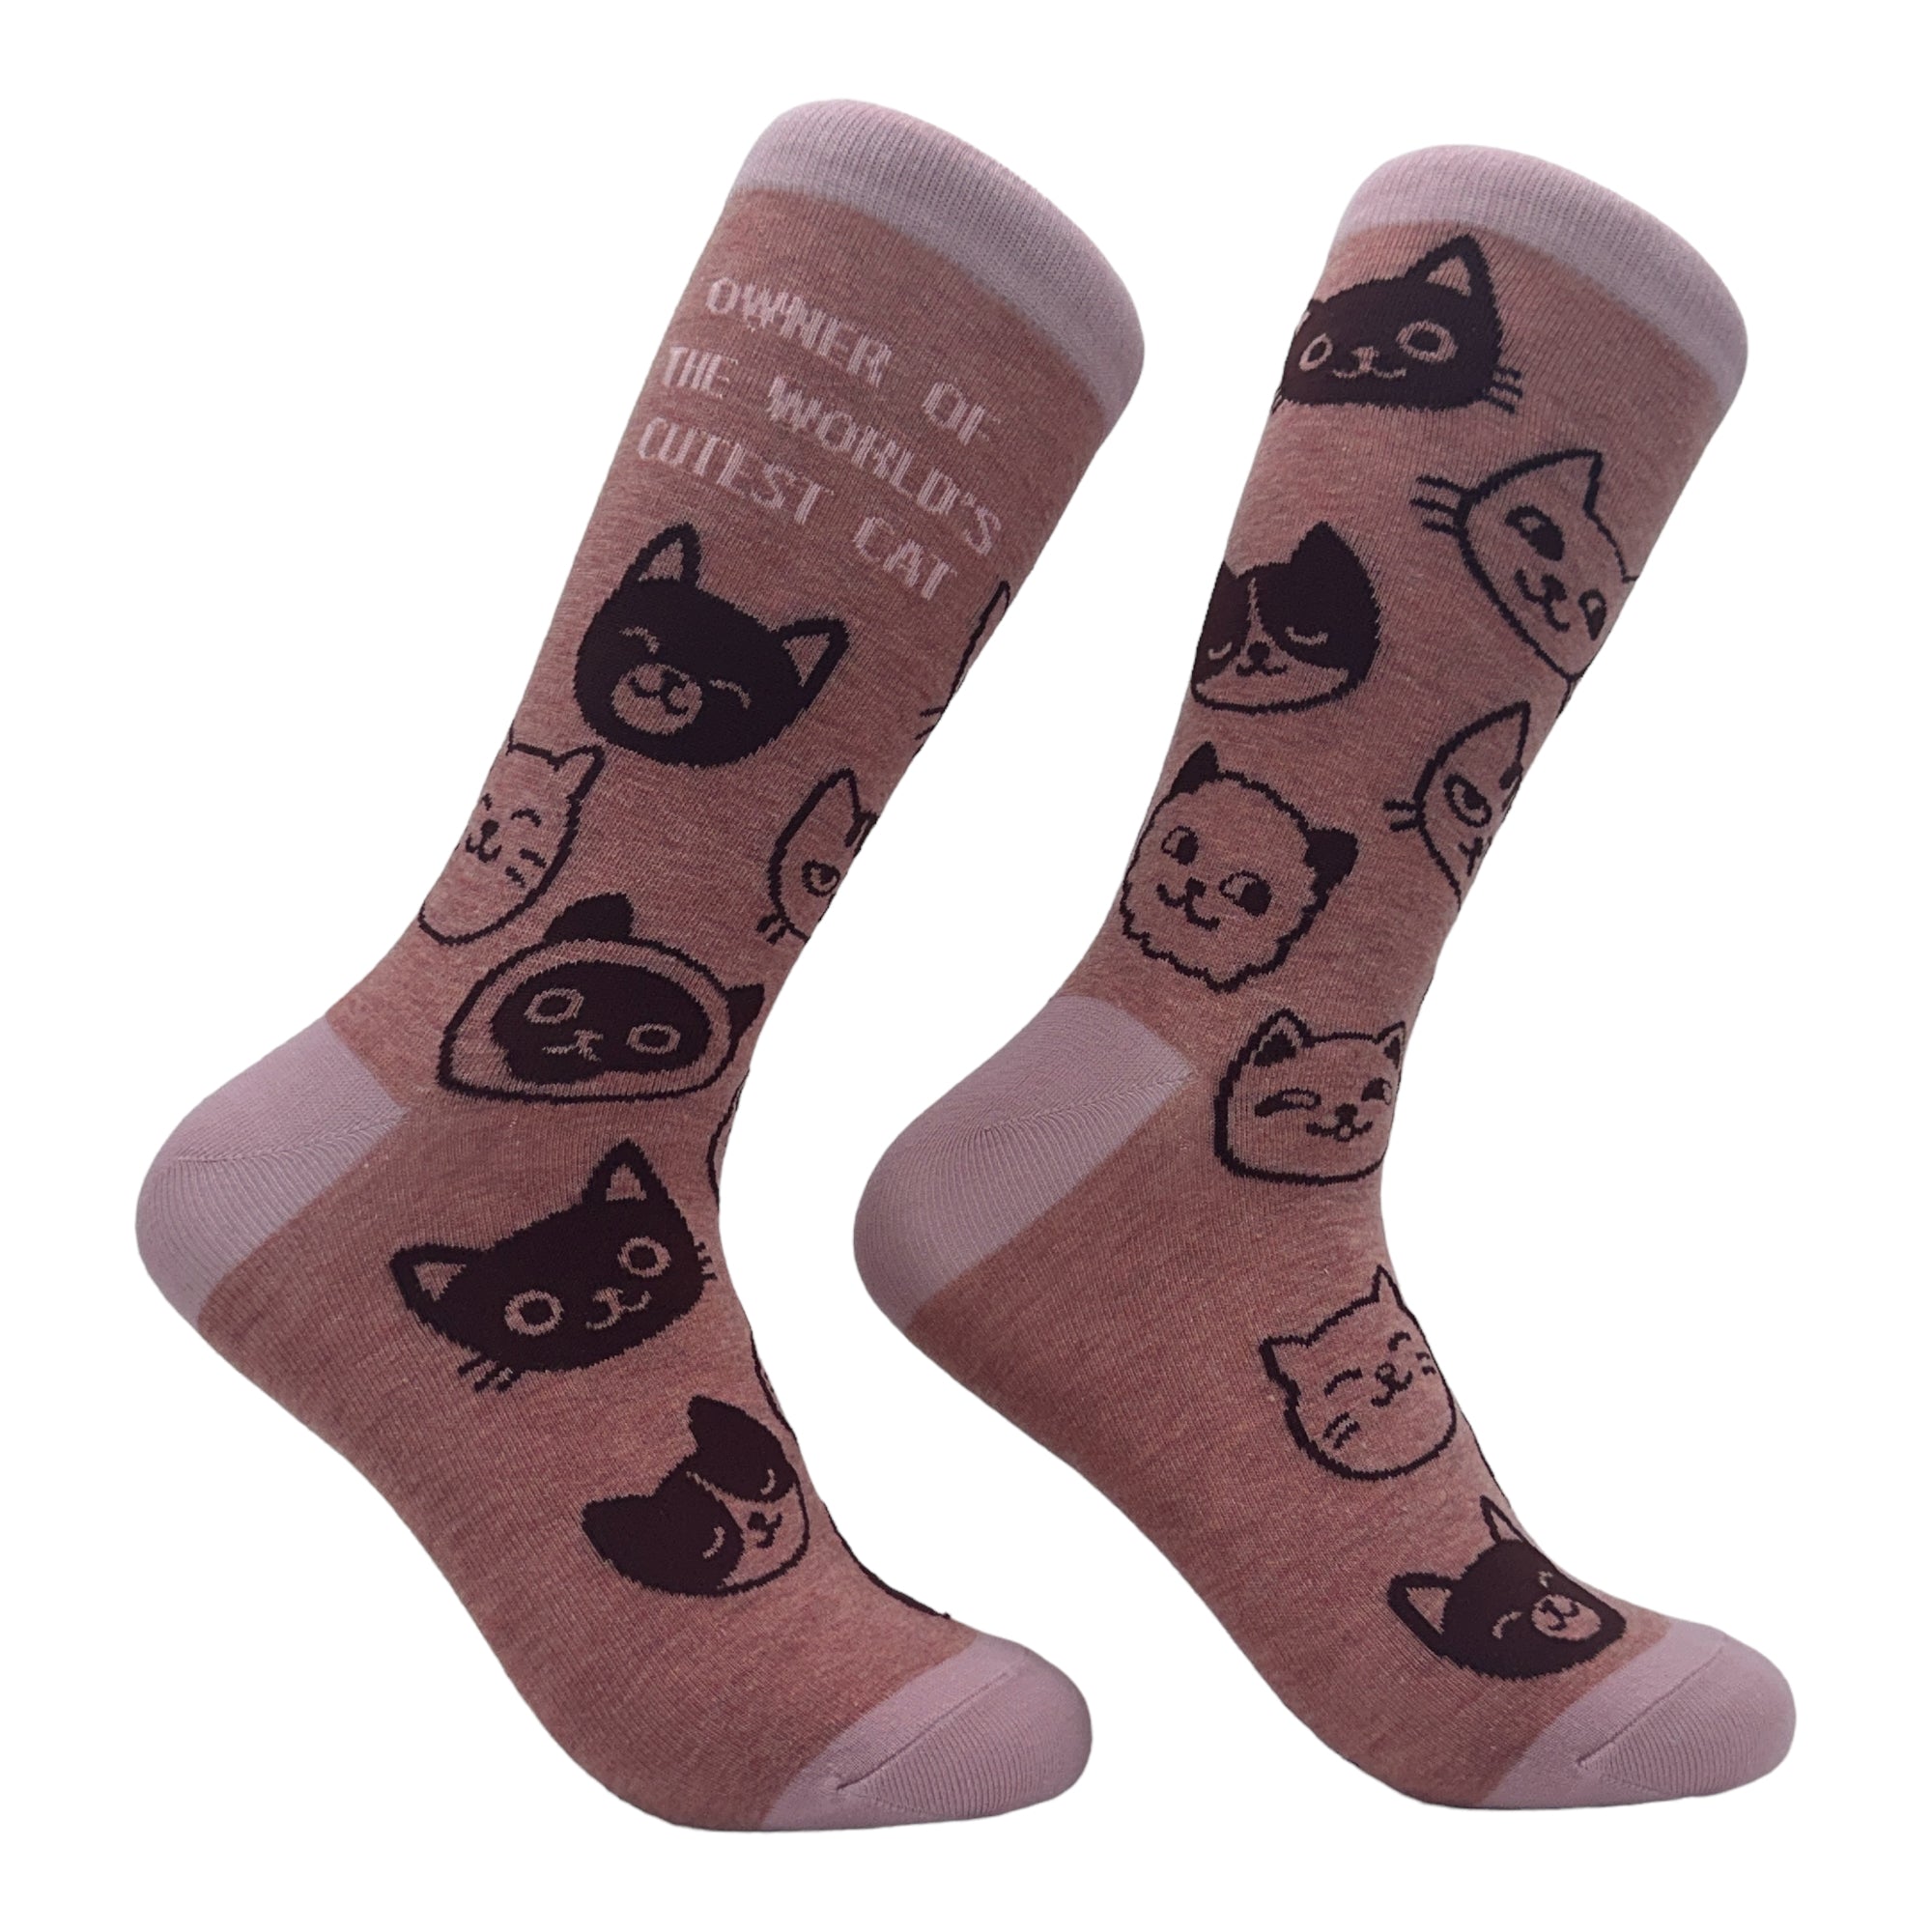 Funny Multi - Cutest Cat Women's Owner Of The Worlds Cutest Cat Sock Nerdy Cat Tee